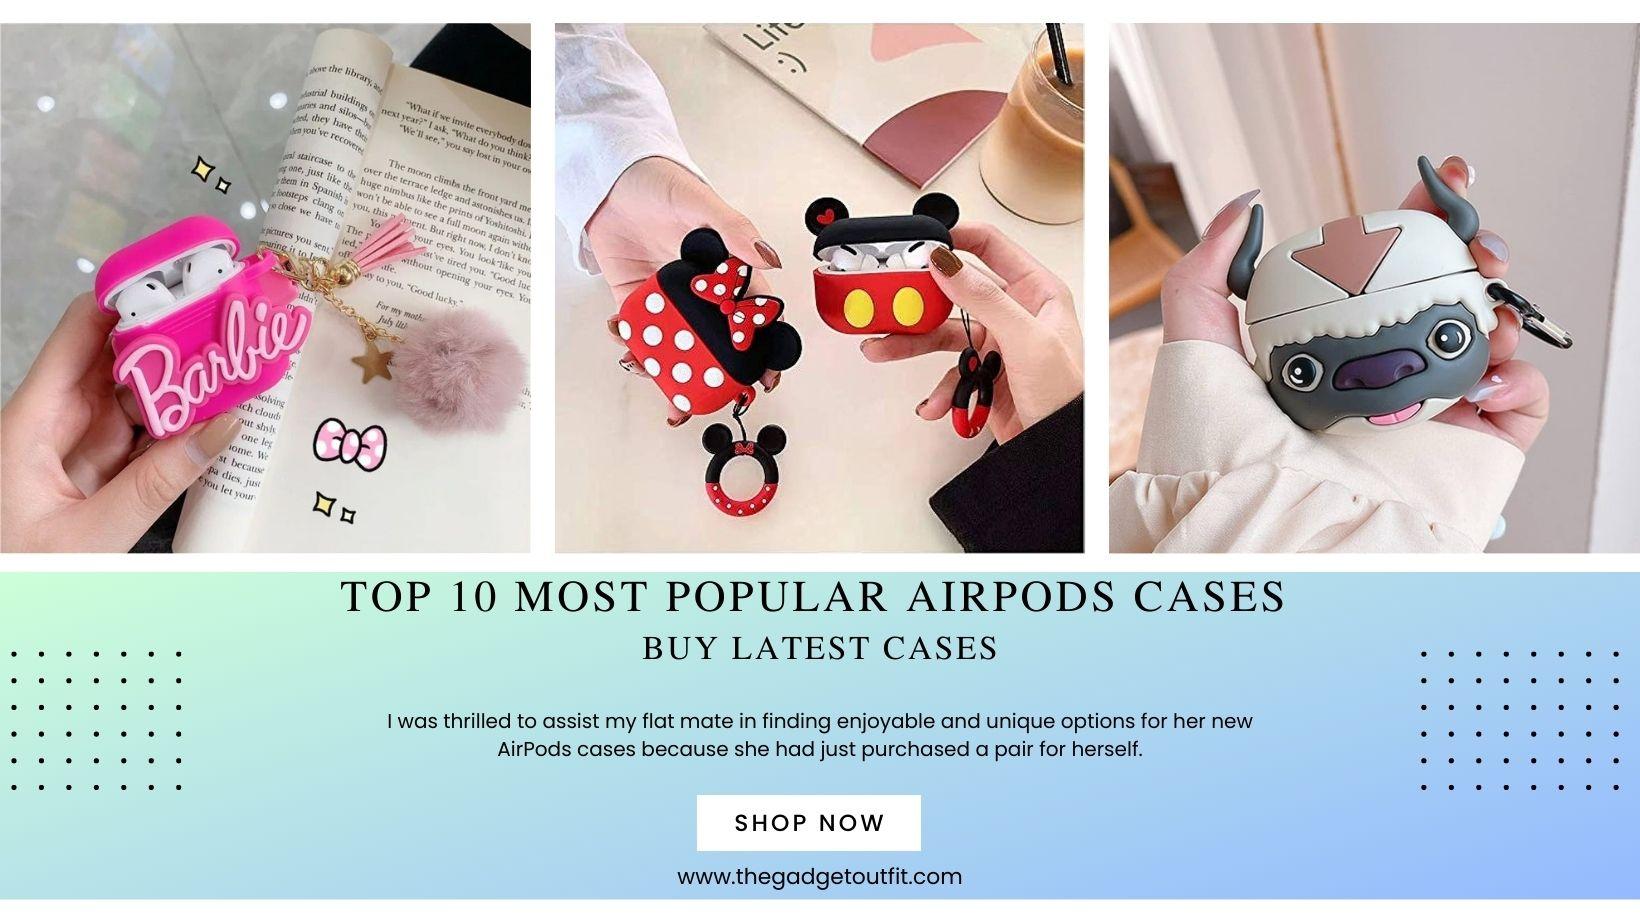 Top 10 Most Popular AirPods Cases | Buy Latest Cases